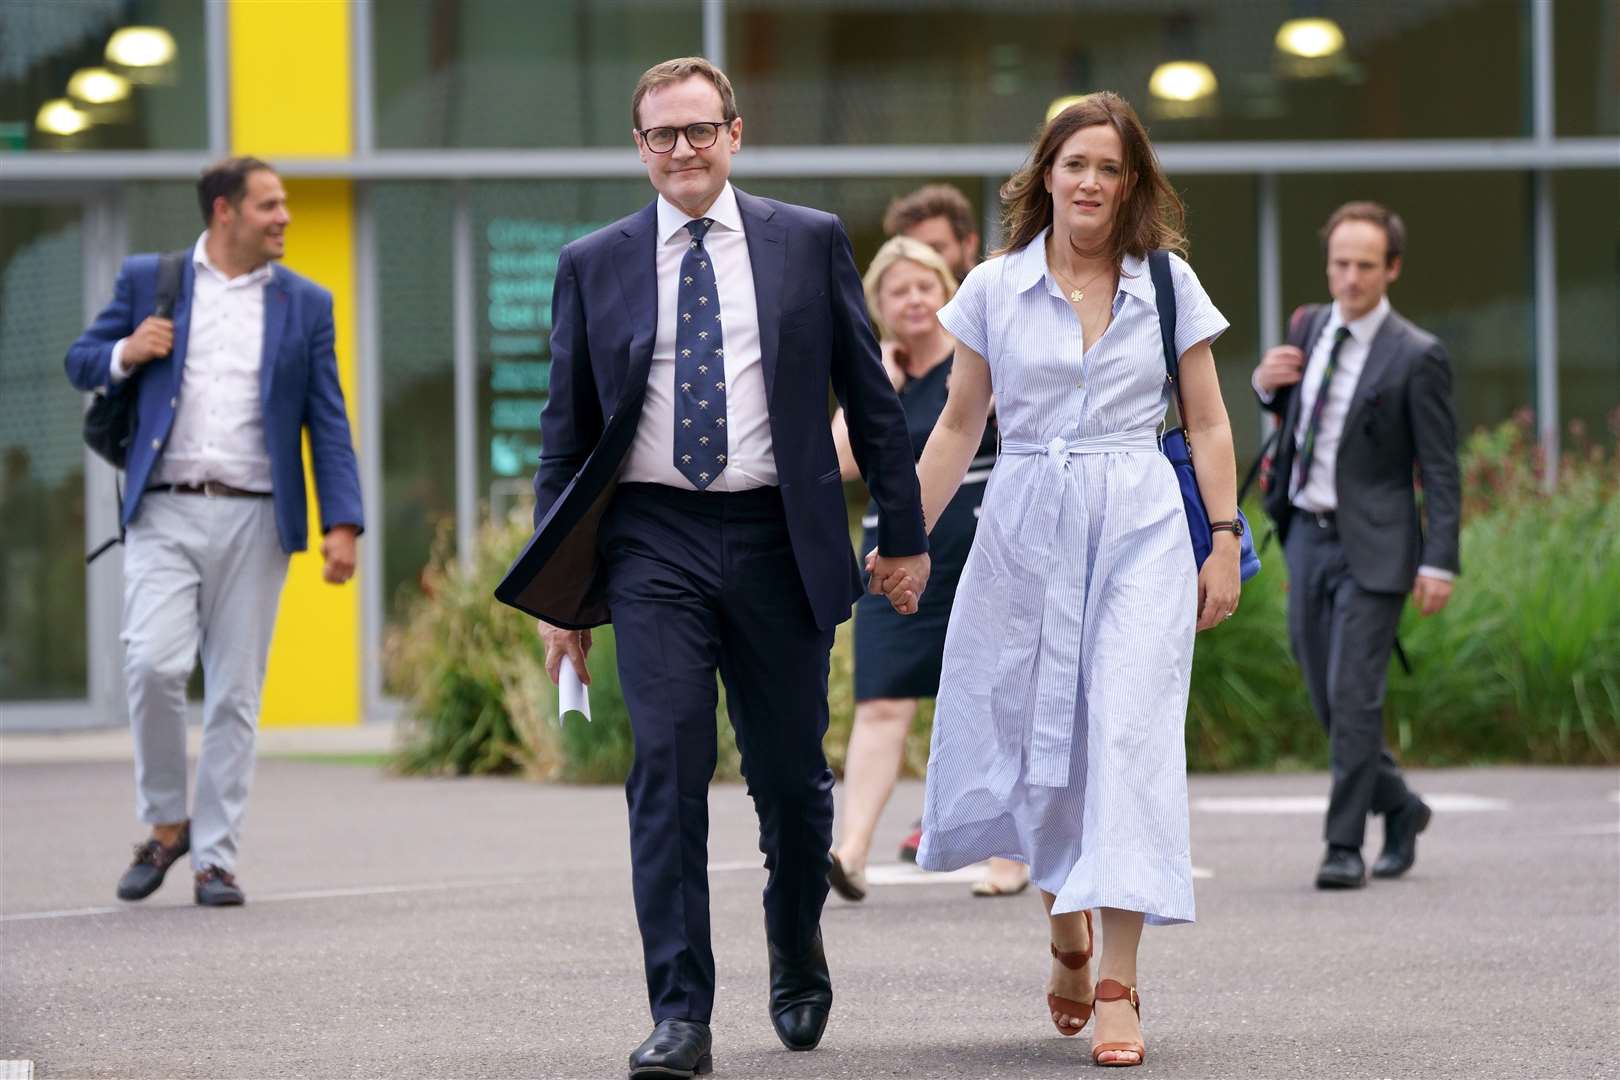 Tom Tugendhat arrives with his wife, Anissia, for the debate at Here East studios in east London (Victoria/PA)